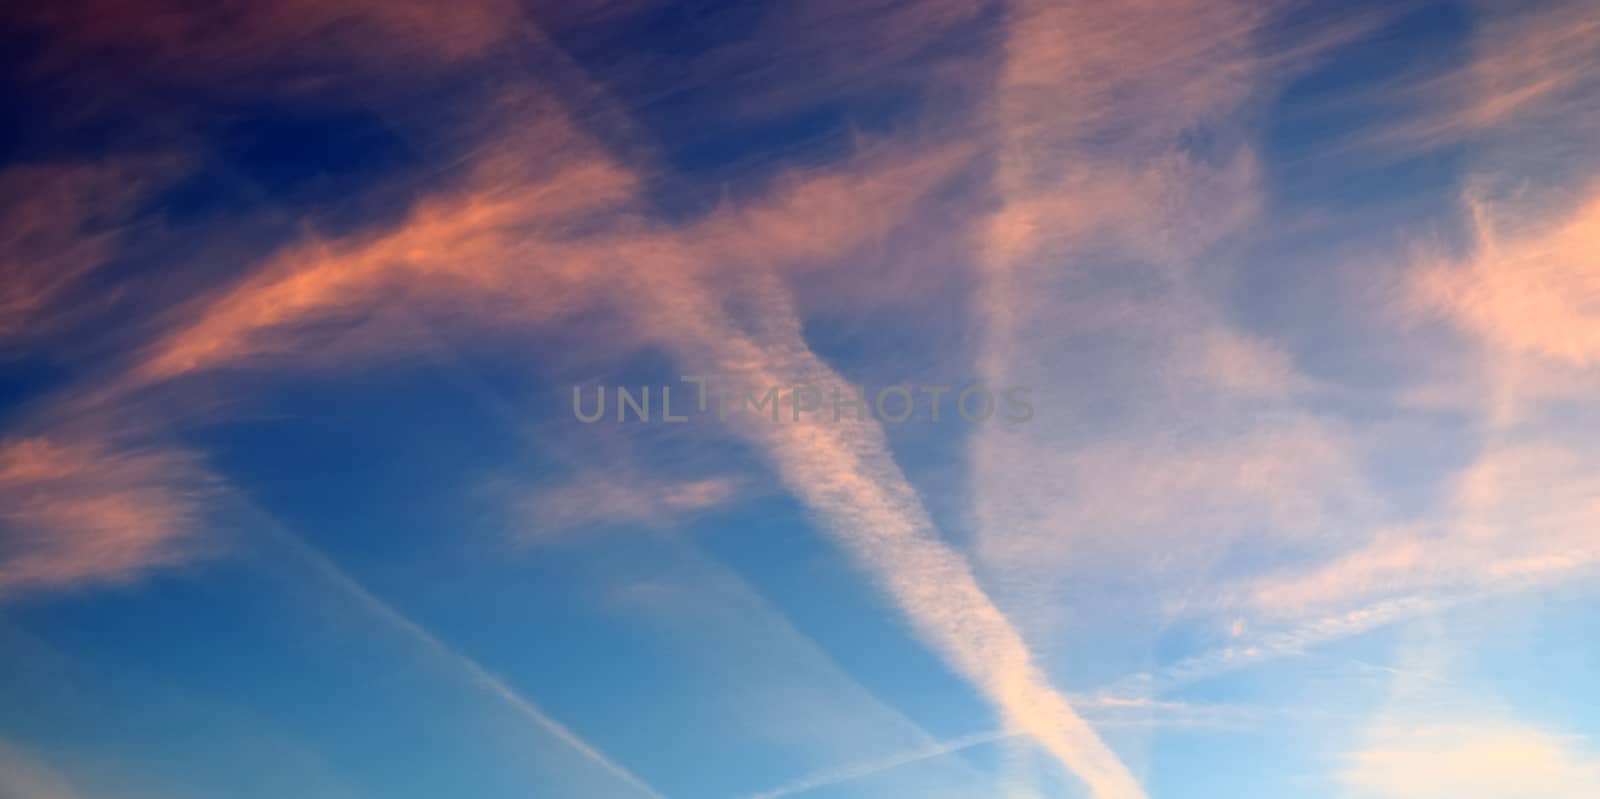 Aircraft condensation contrails in the blue sky inbetween some c by MP_foto71